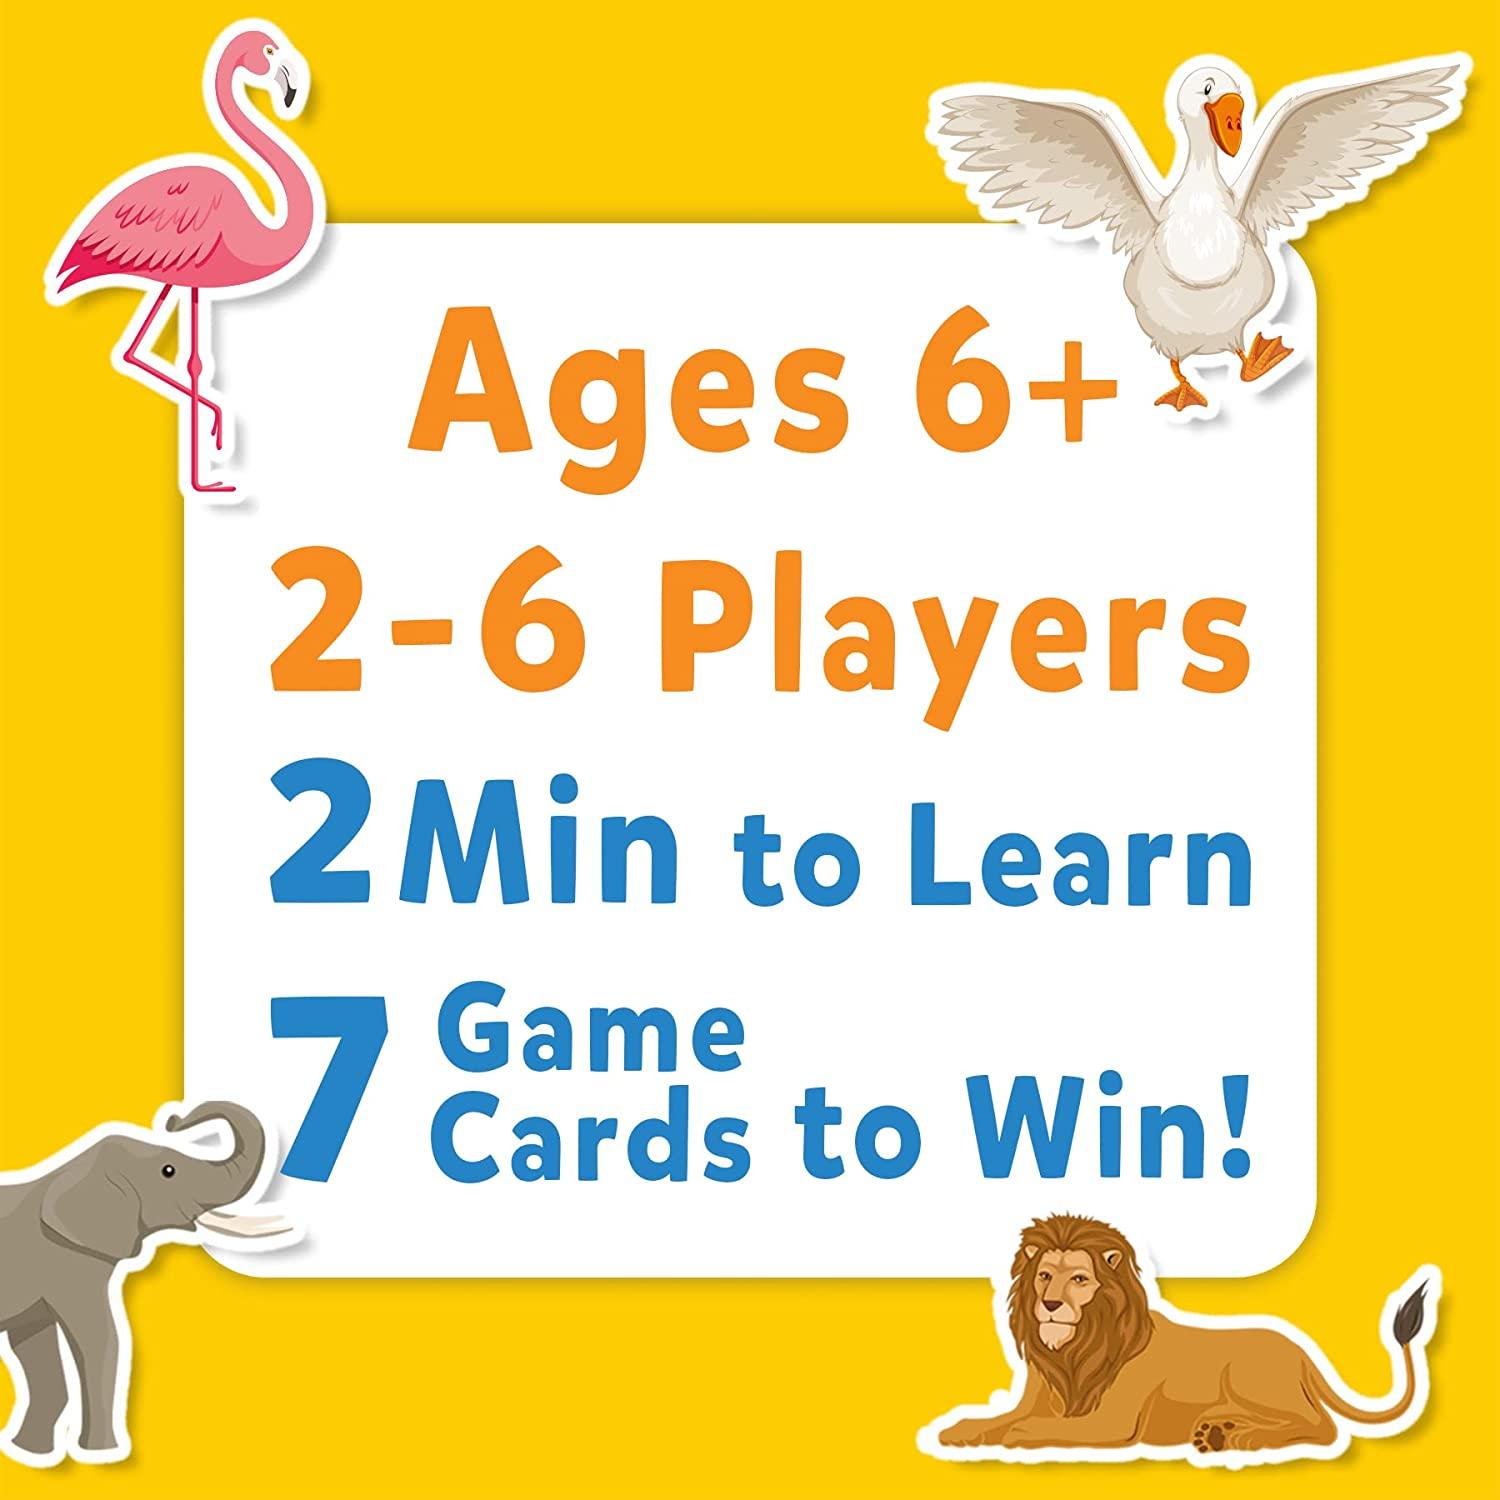 Skillmatics Guess in 10 Animal Planet Mega Pack - Family Card Game for Ages 6+ - FunCorp India